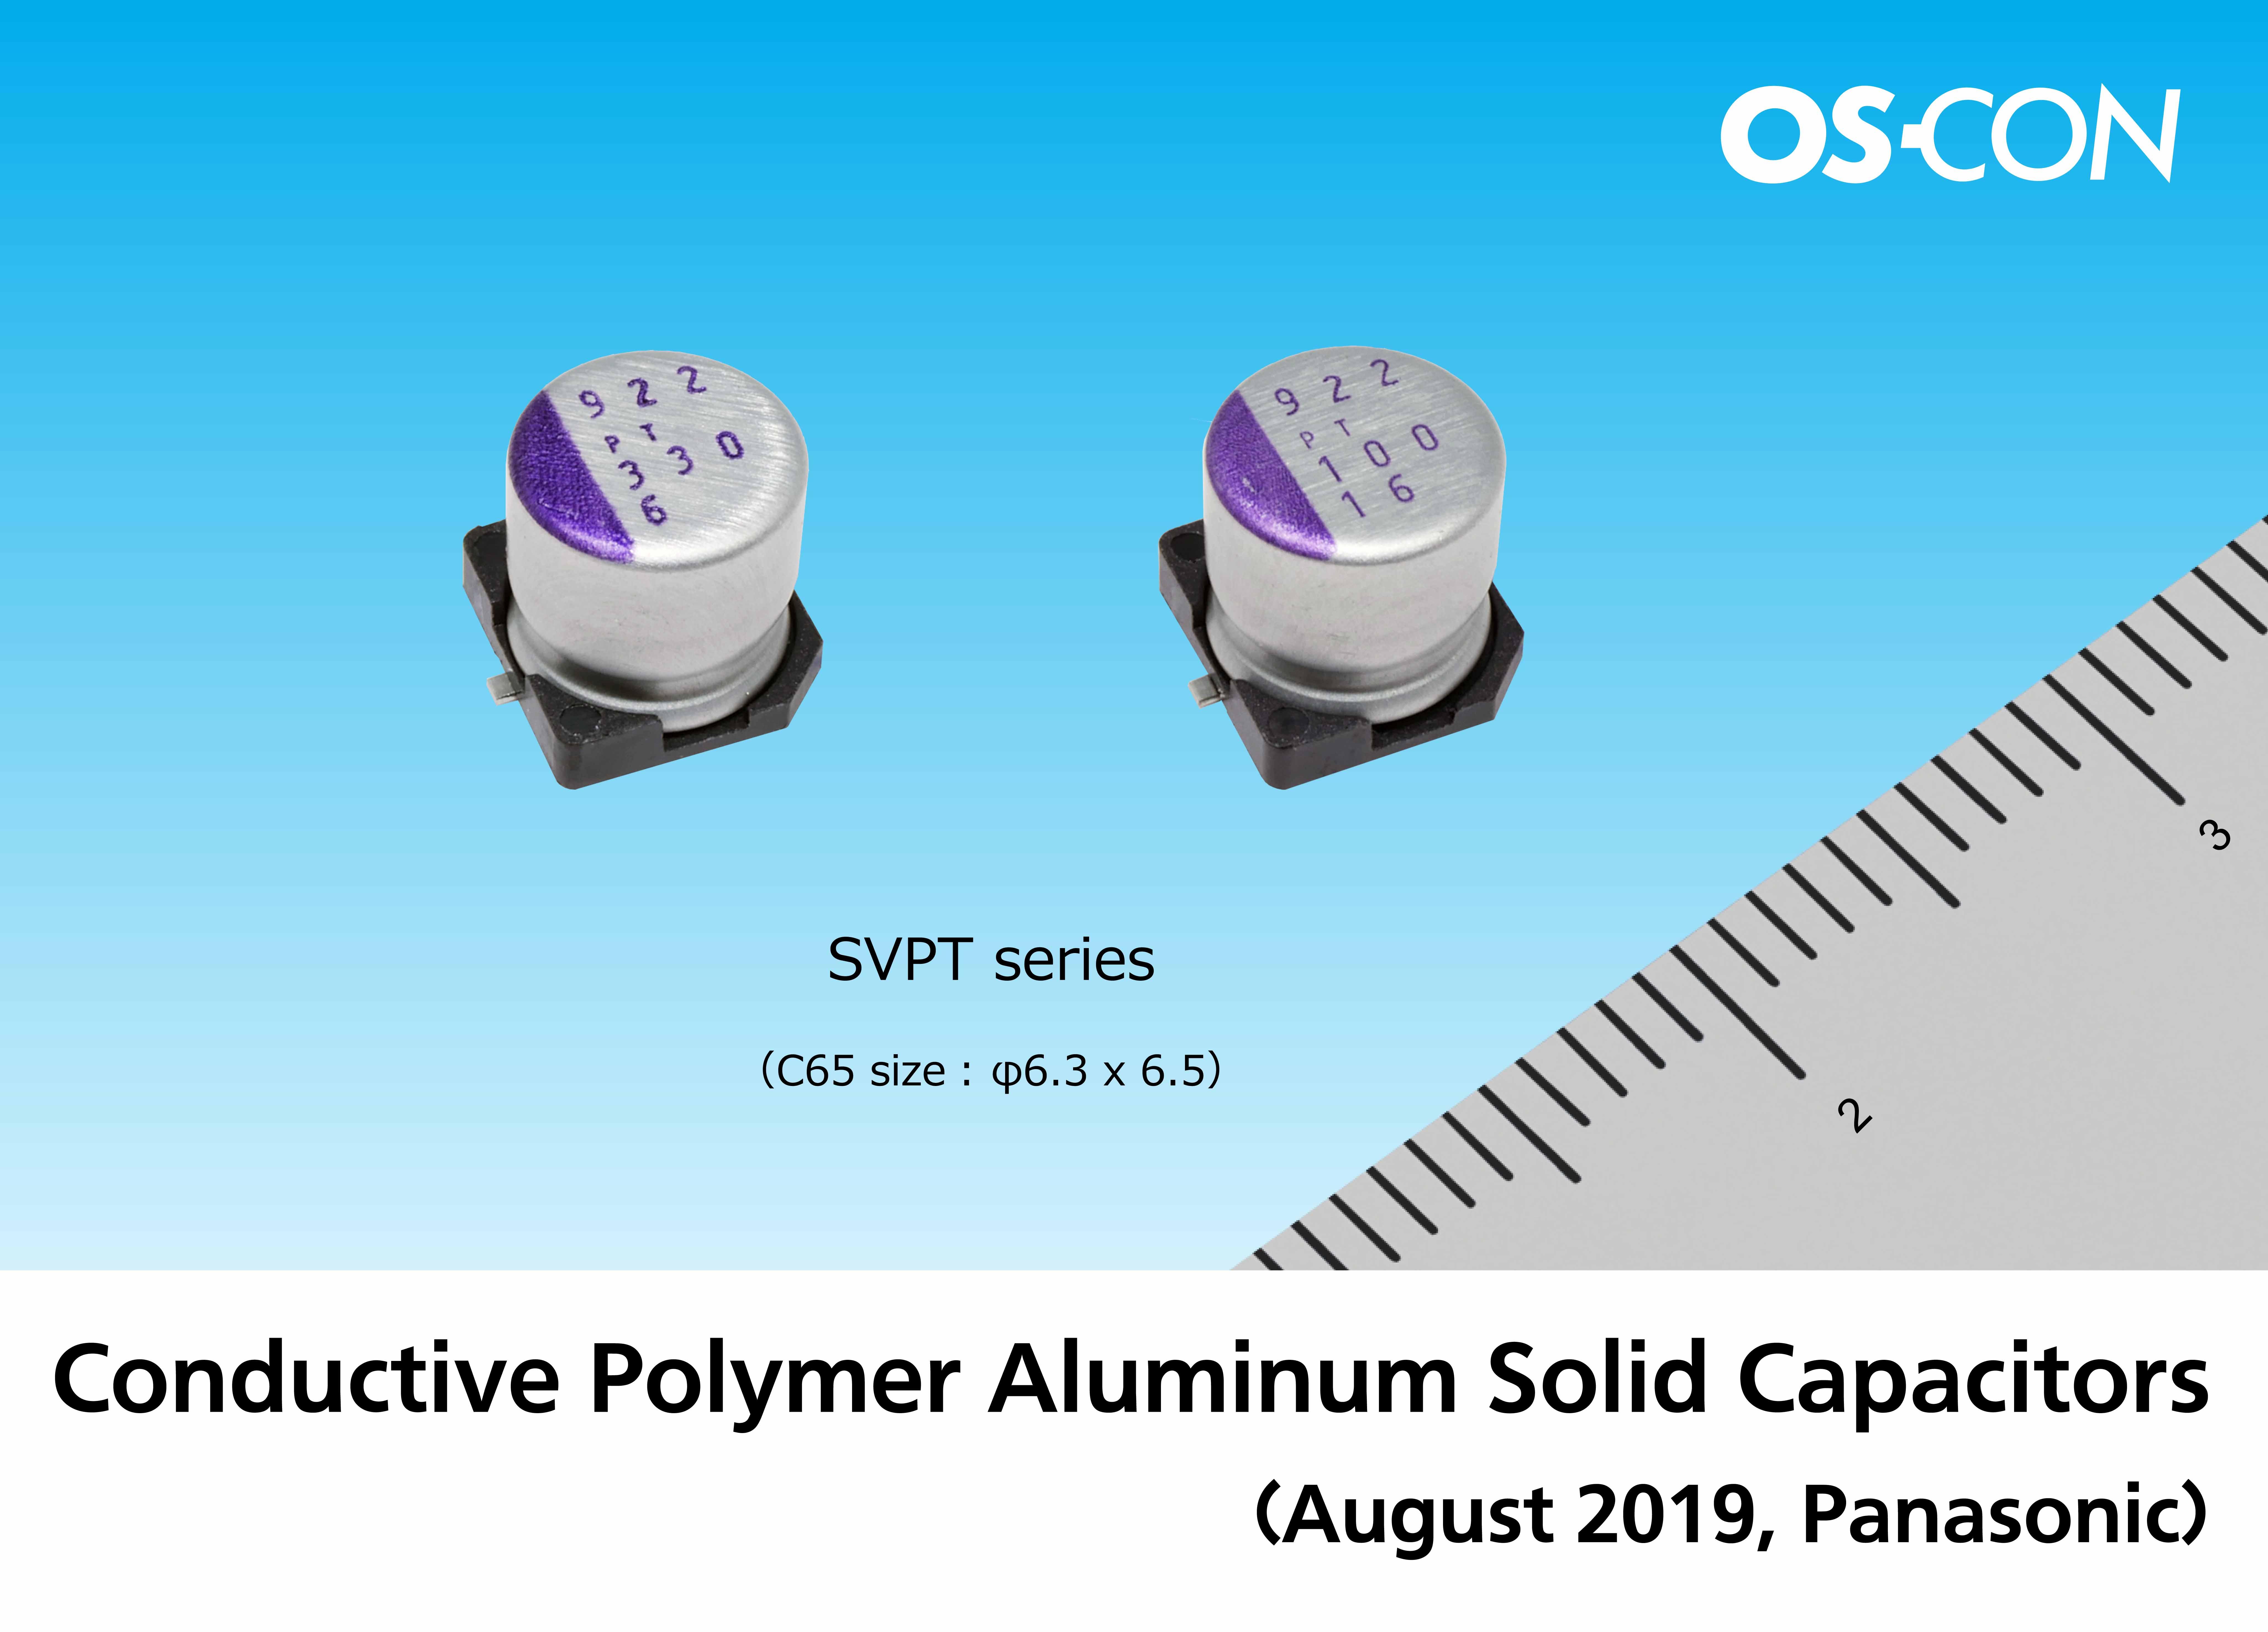 image: Panasonic's new SVPT series of conductive-polymer aluminum solid electrolytic capacitors